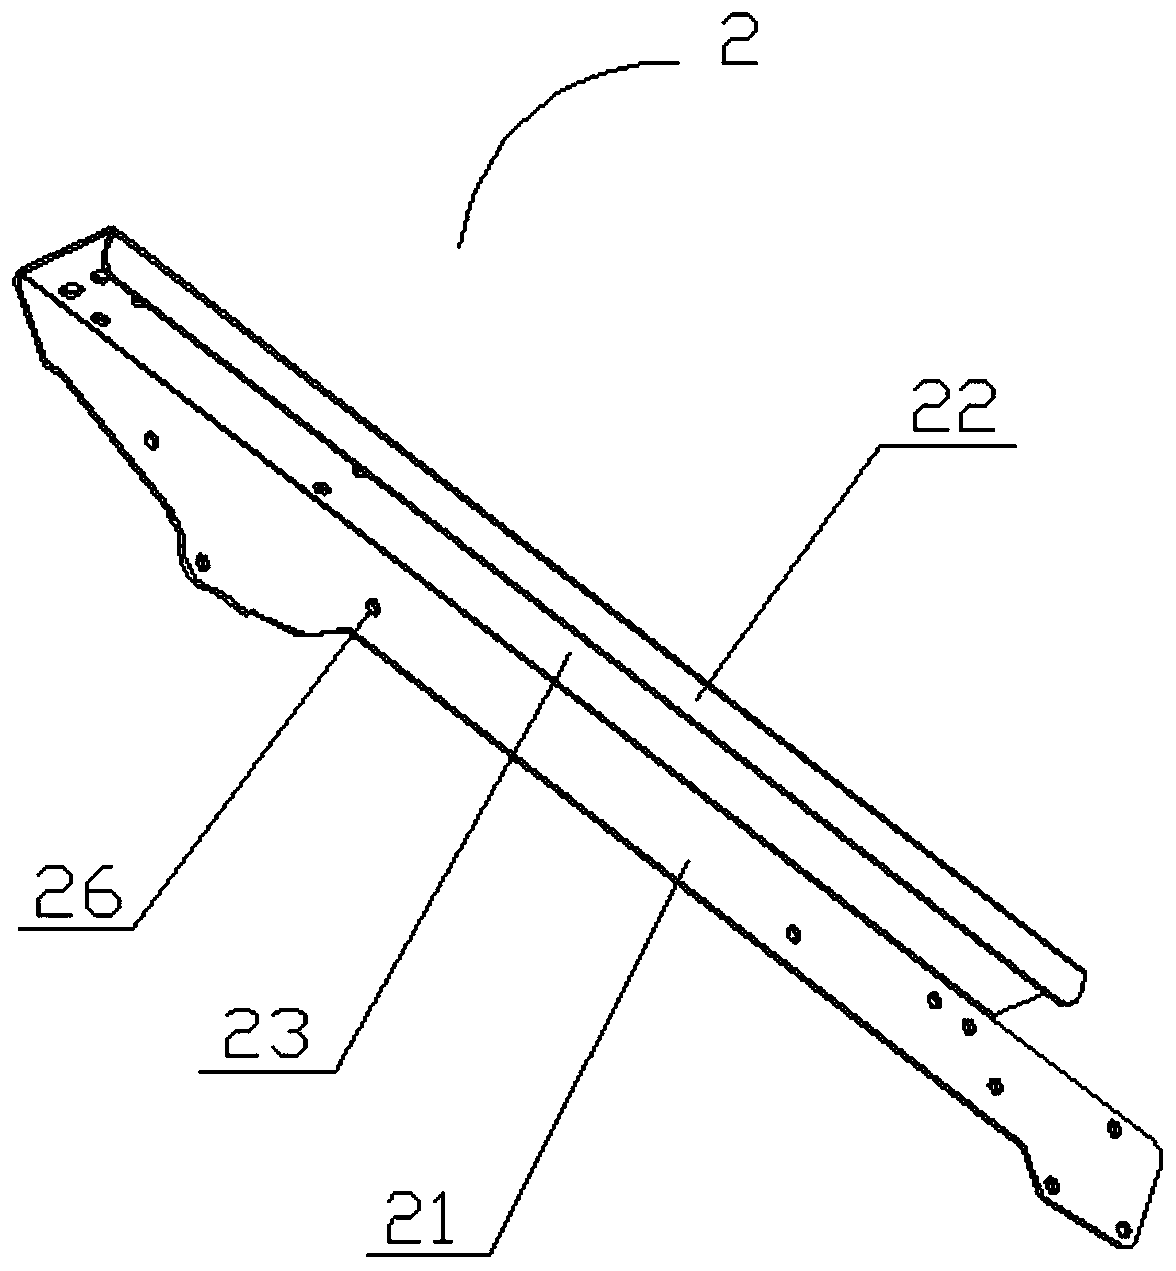 Supporting plate and supporting assembly frame